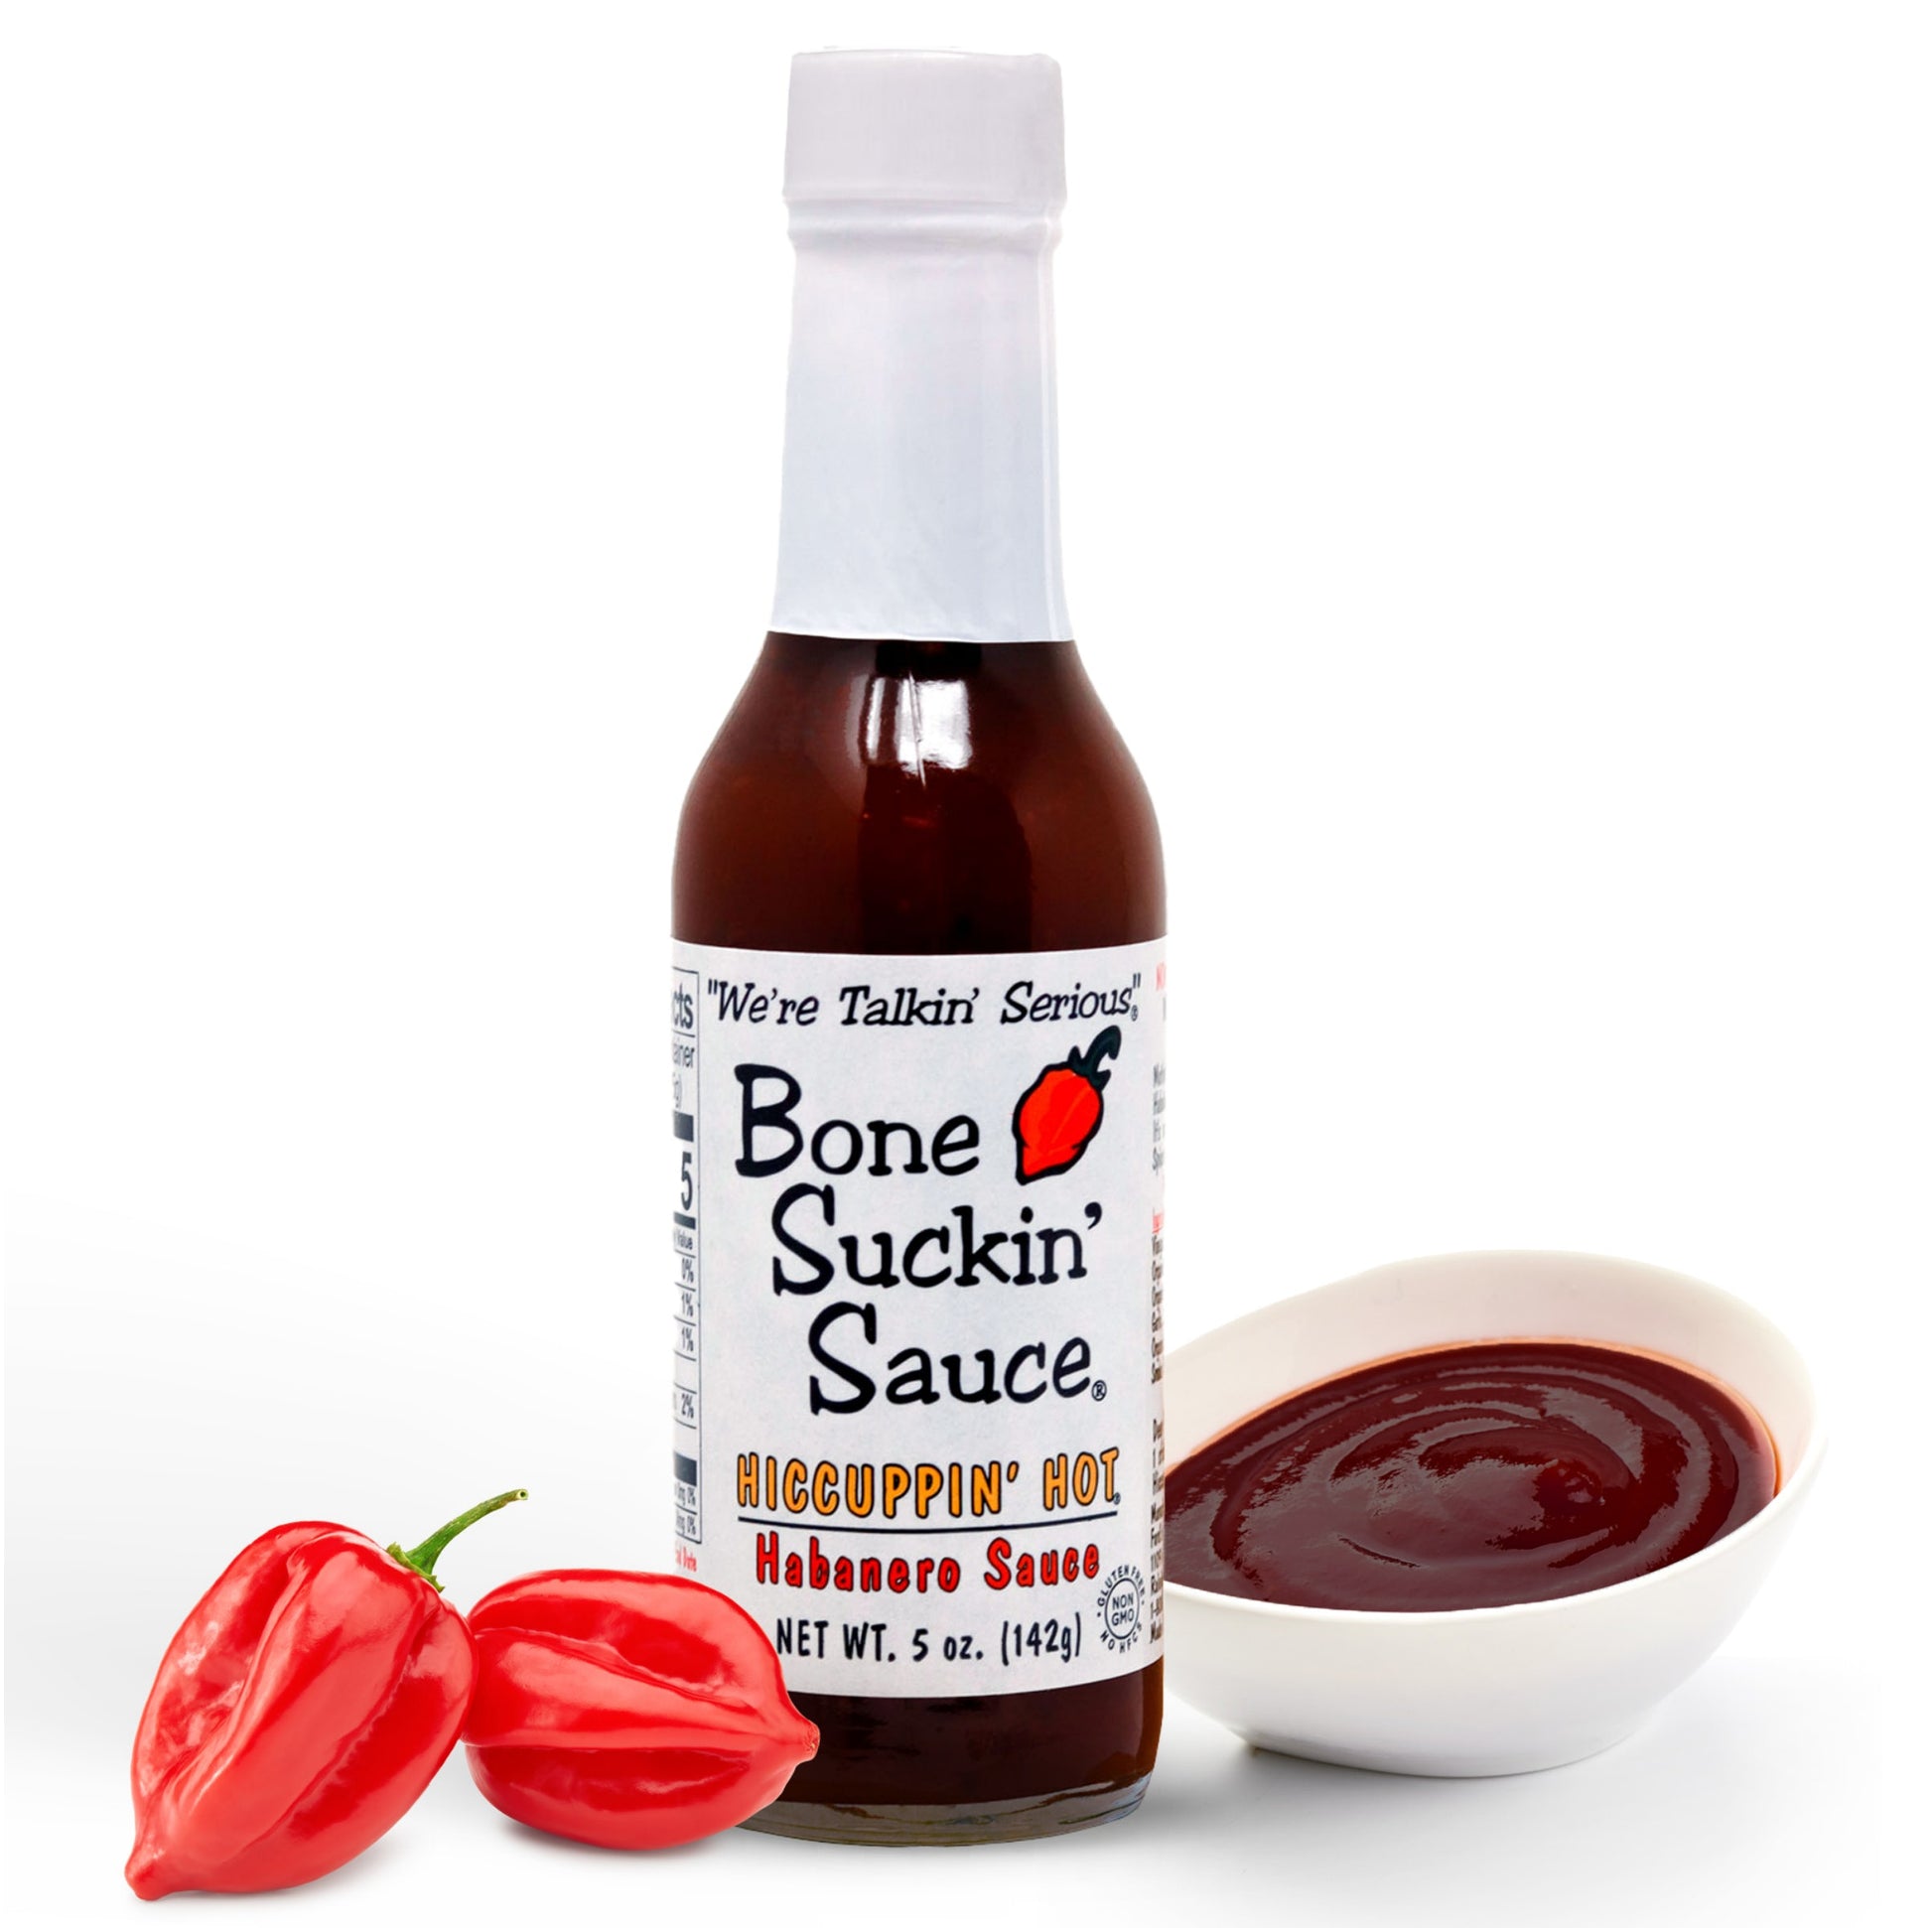 Bone Suckin'®, HICCUPPIN' Hot® Habanero Sauce 5 oz. CLEAN EATING, PURE TASTE: Non-GMO, Gluten-Free, Kosher, Pareve, Dairy Free and No High Fructose Corn Syrup - Elevate your meals with our sauce crafted from clean, quality ingredients for a broad range of dietary preferences.